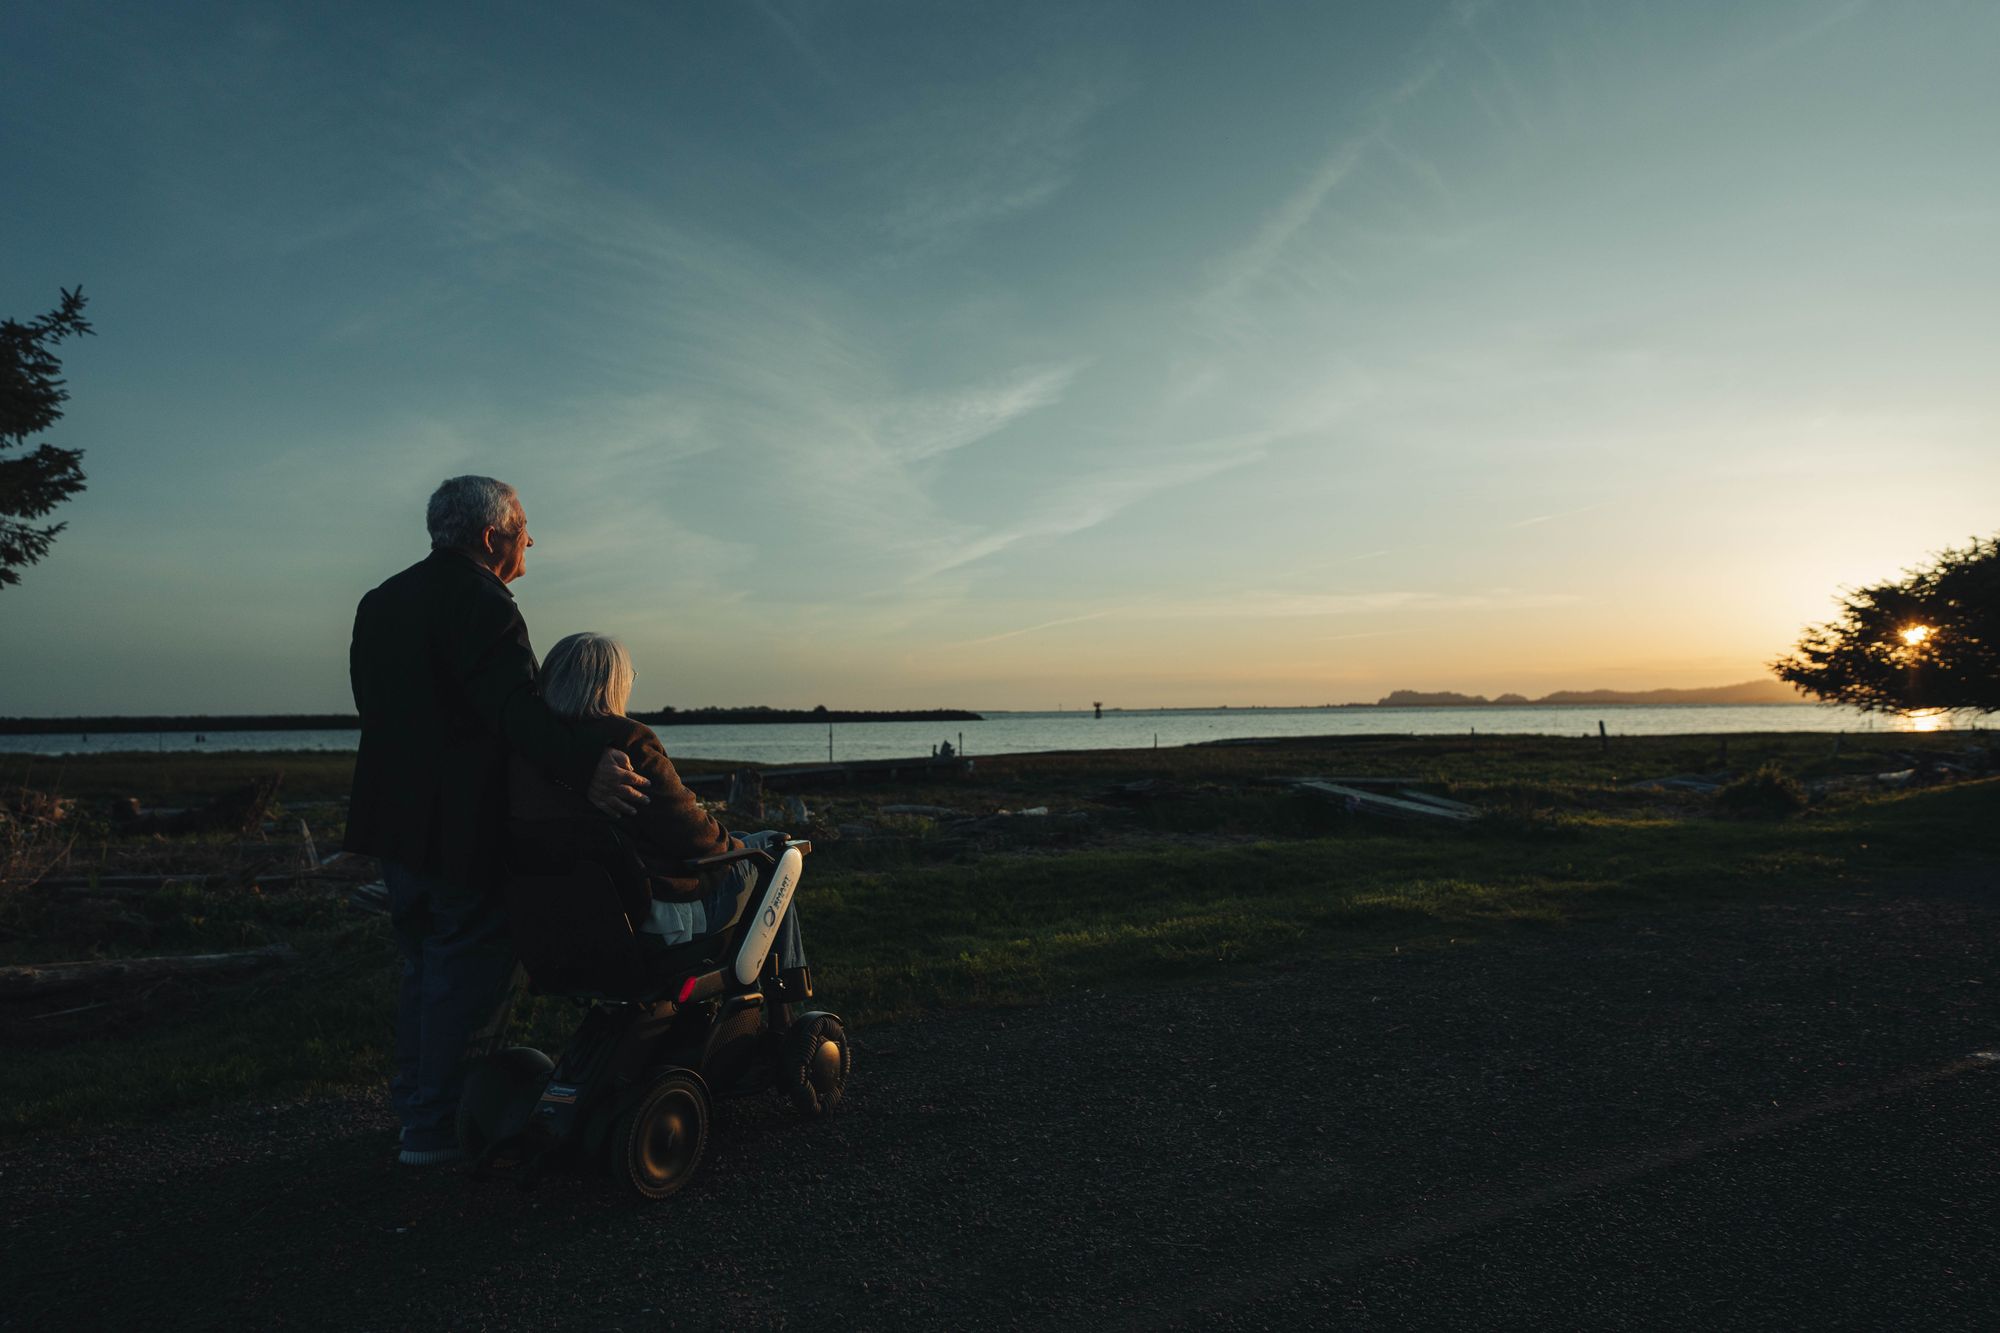 A wheelchair user with her husband watching the beautiful sunset over the ocean.